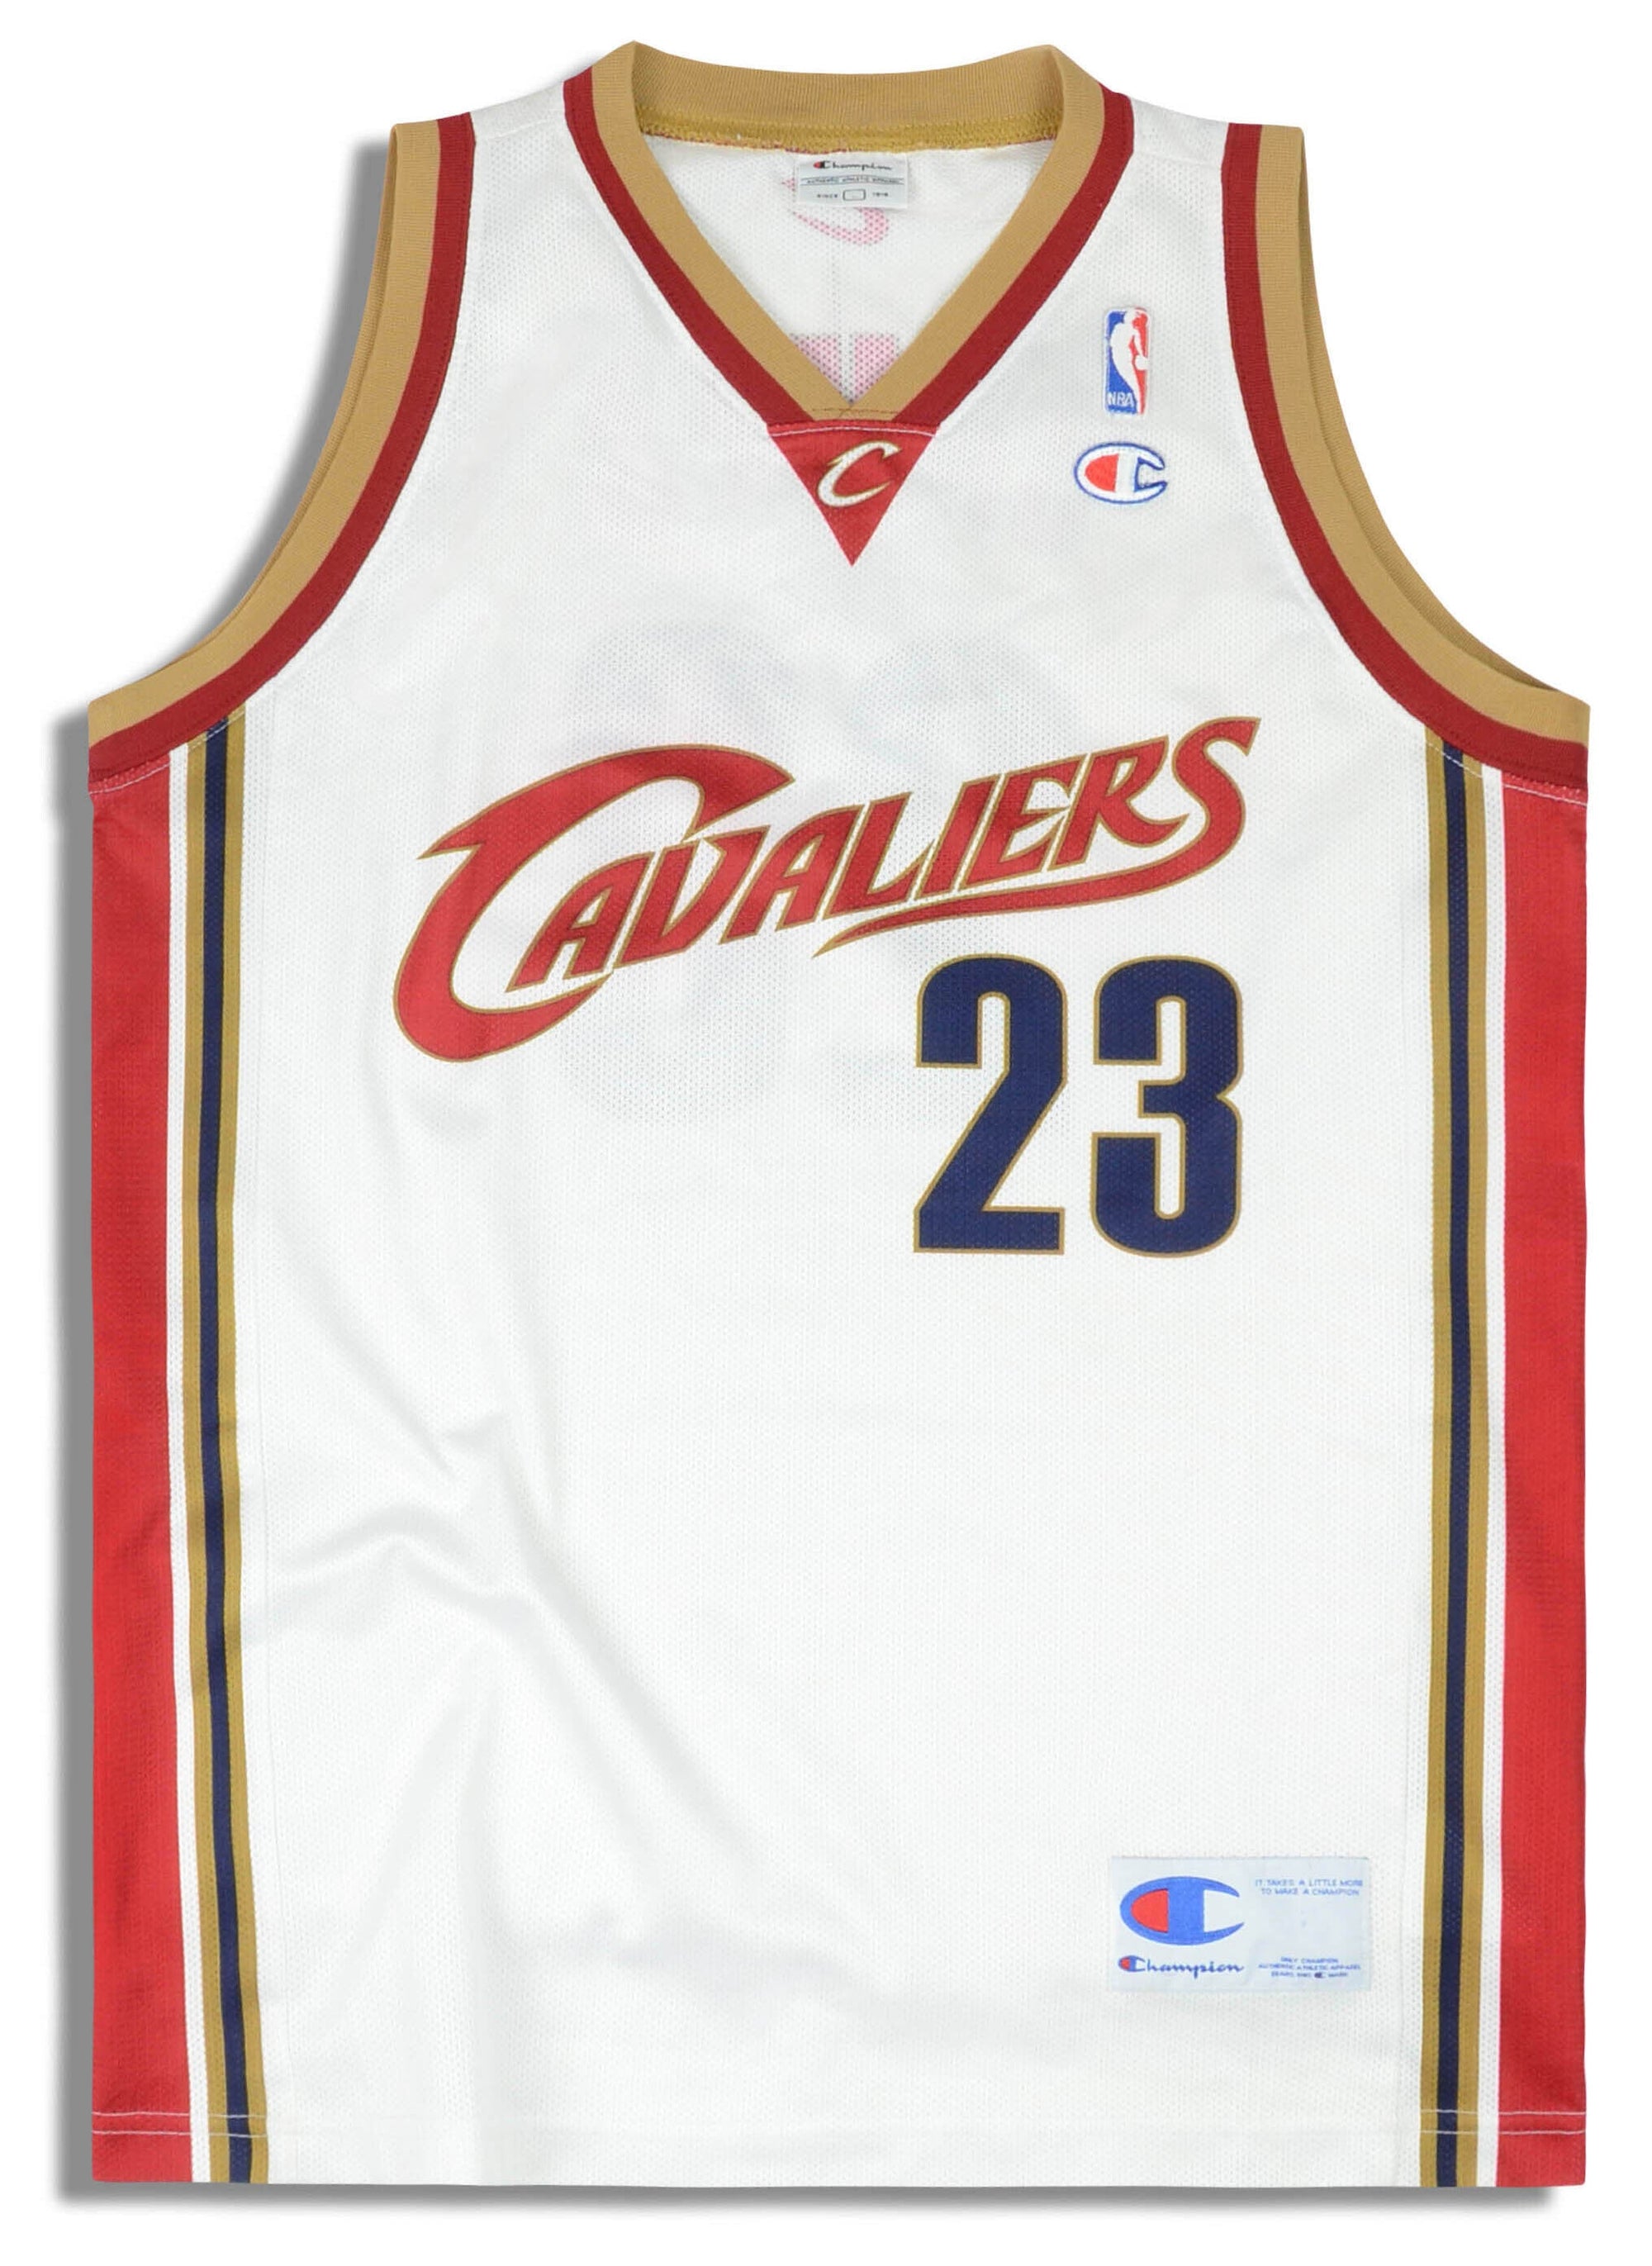 LeBron James #23 Cleveland Cavaliers Cavs adidas NBA Jersey Toddler L 7  Rookie